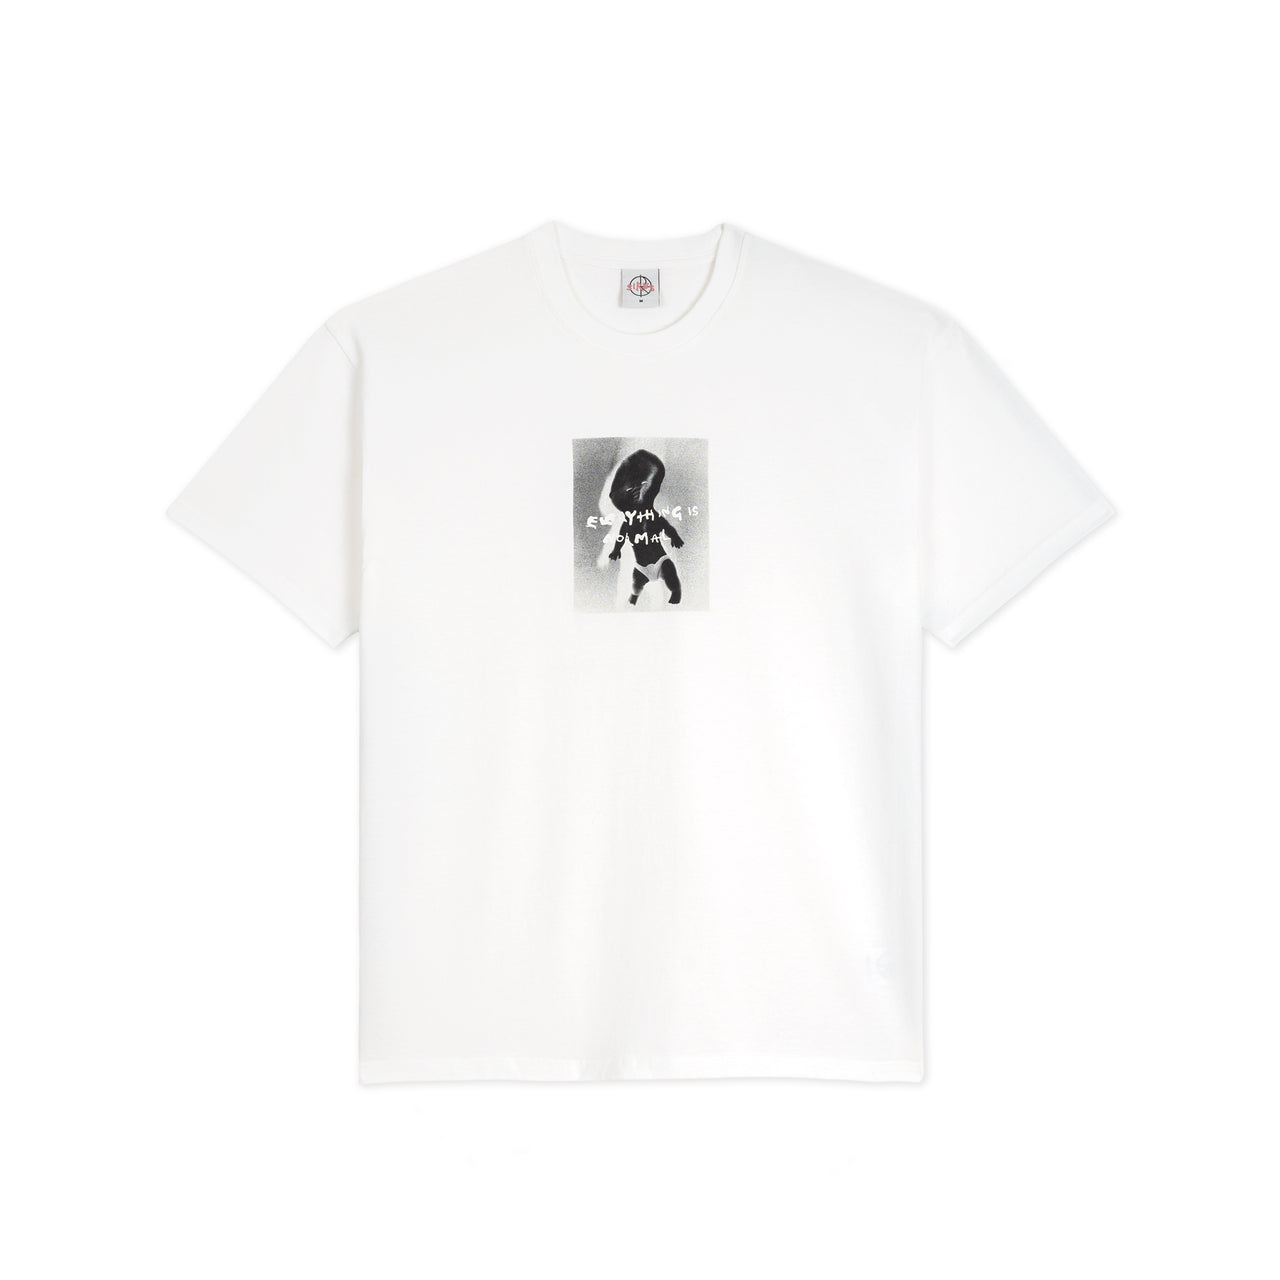 Tee | Everything Is Normal - White